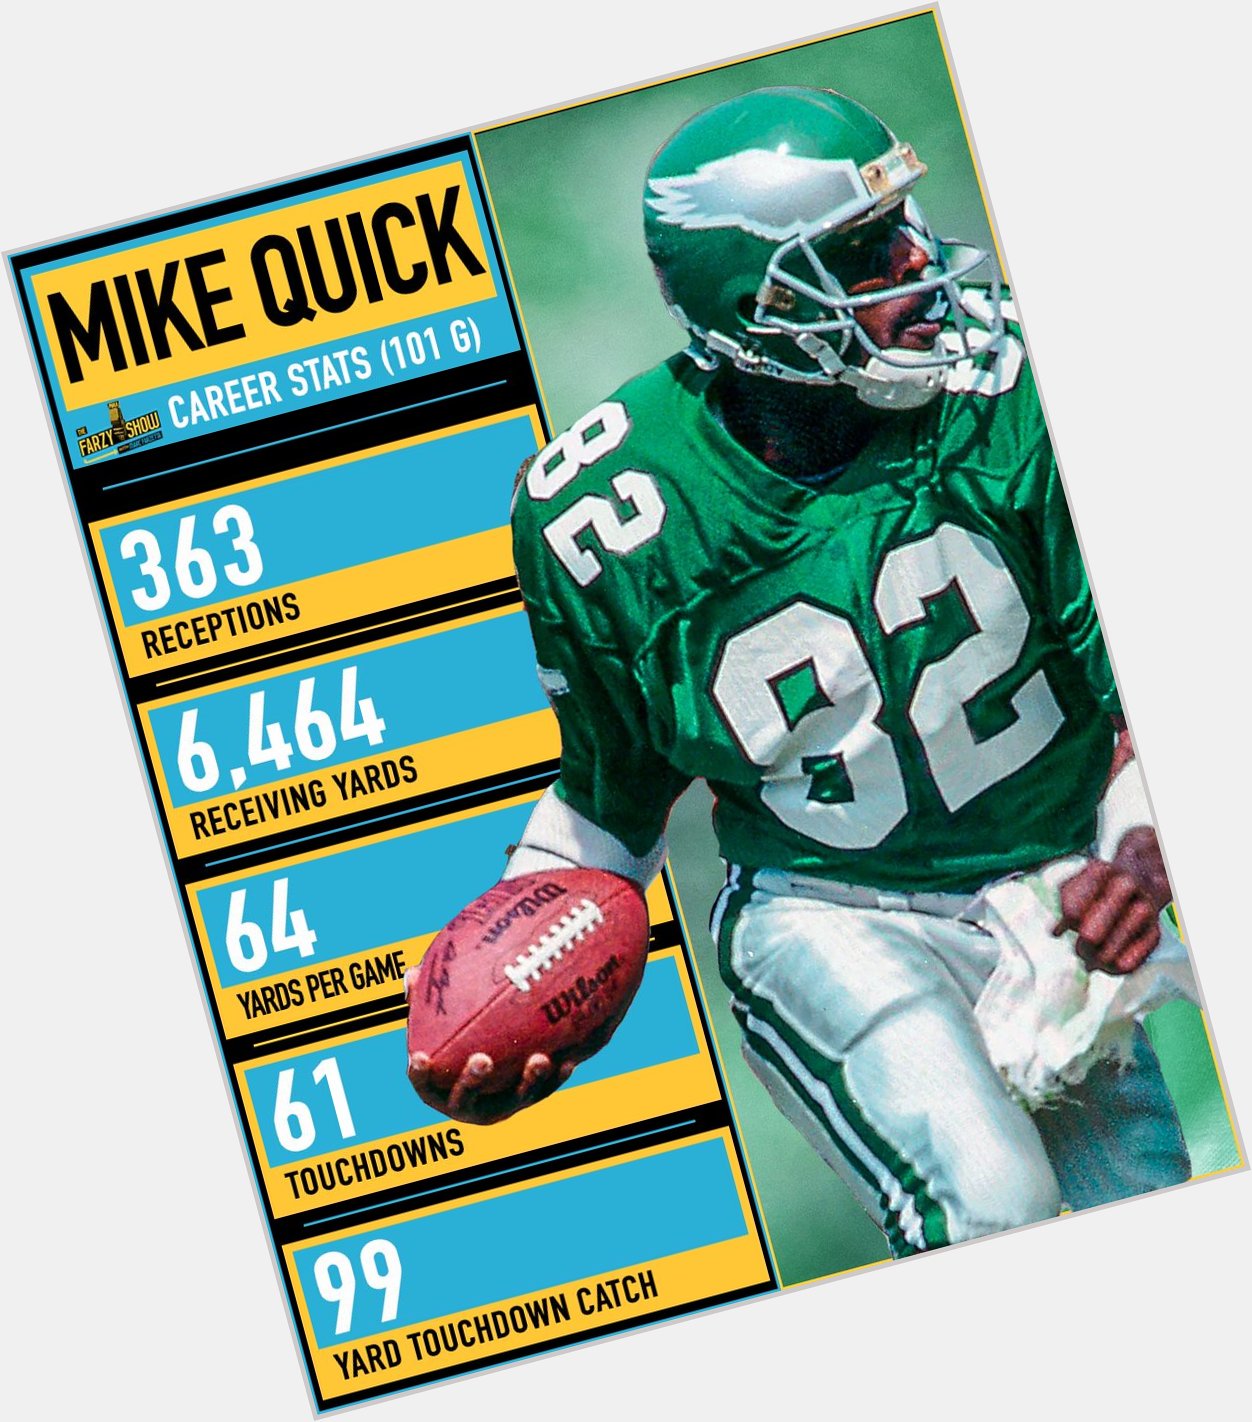 Happy birthday to great Mike Quick ( Incredible numbers! 